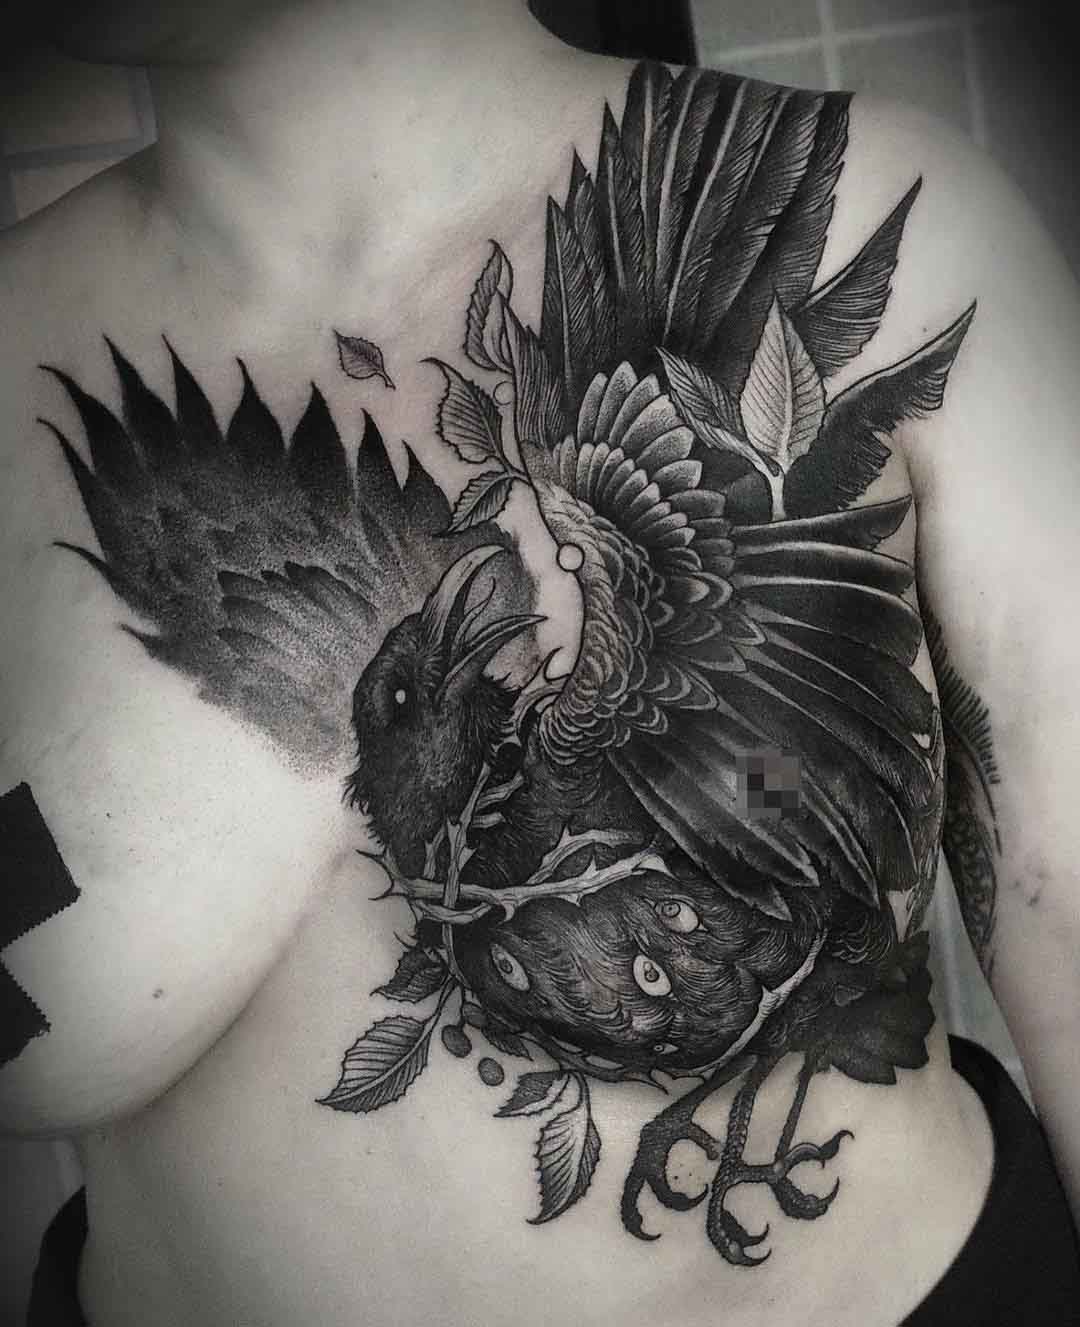 Shaman crow done by Tyler Nguyen out of My Little Needle Tattoos Plymouth  MI  rtattoos